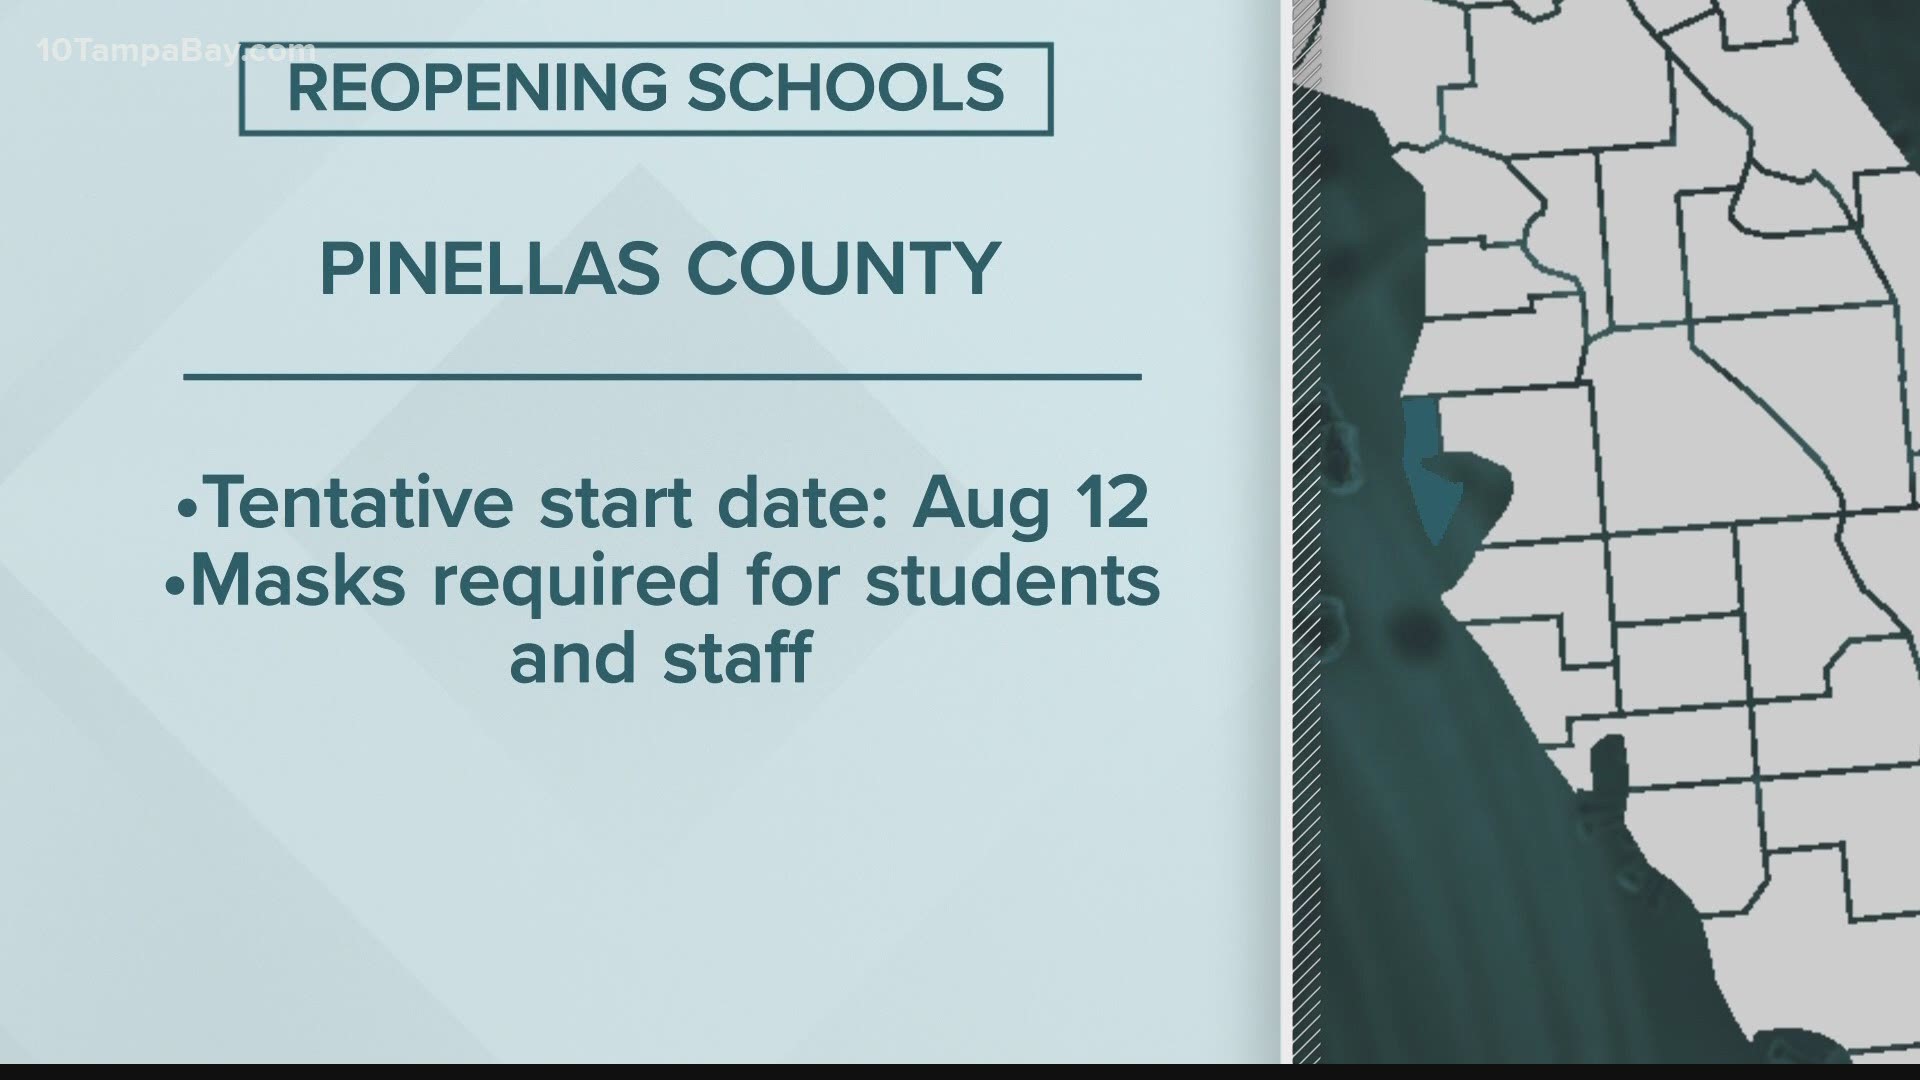 School districts around the Tampa Bay area are working on plans to reopen schools for students and staff safely during the coronavirus pandemic.